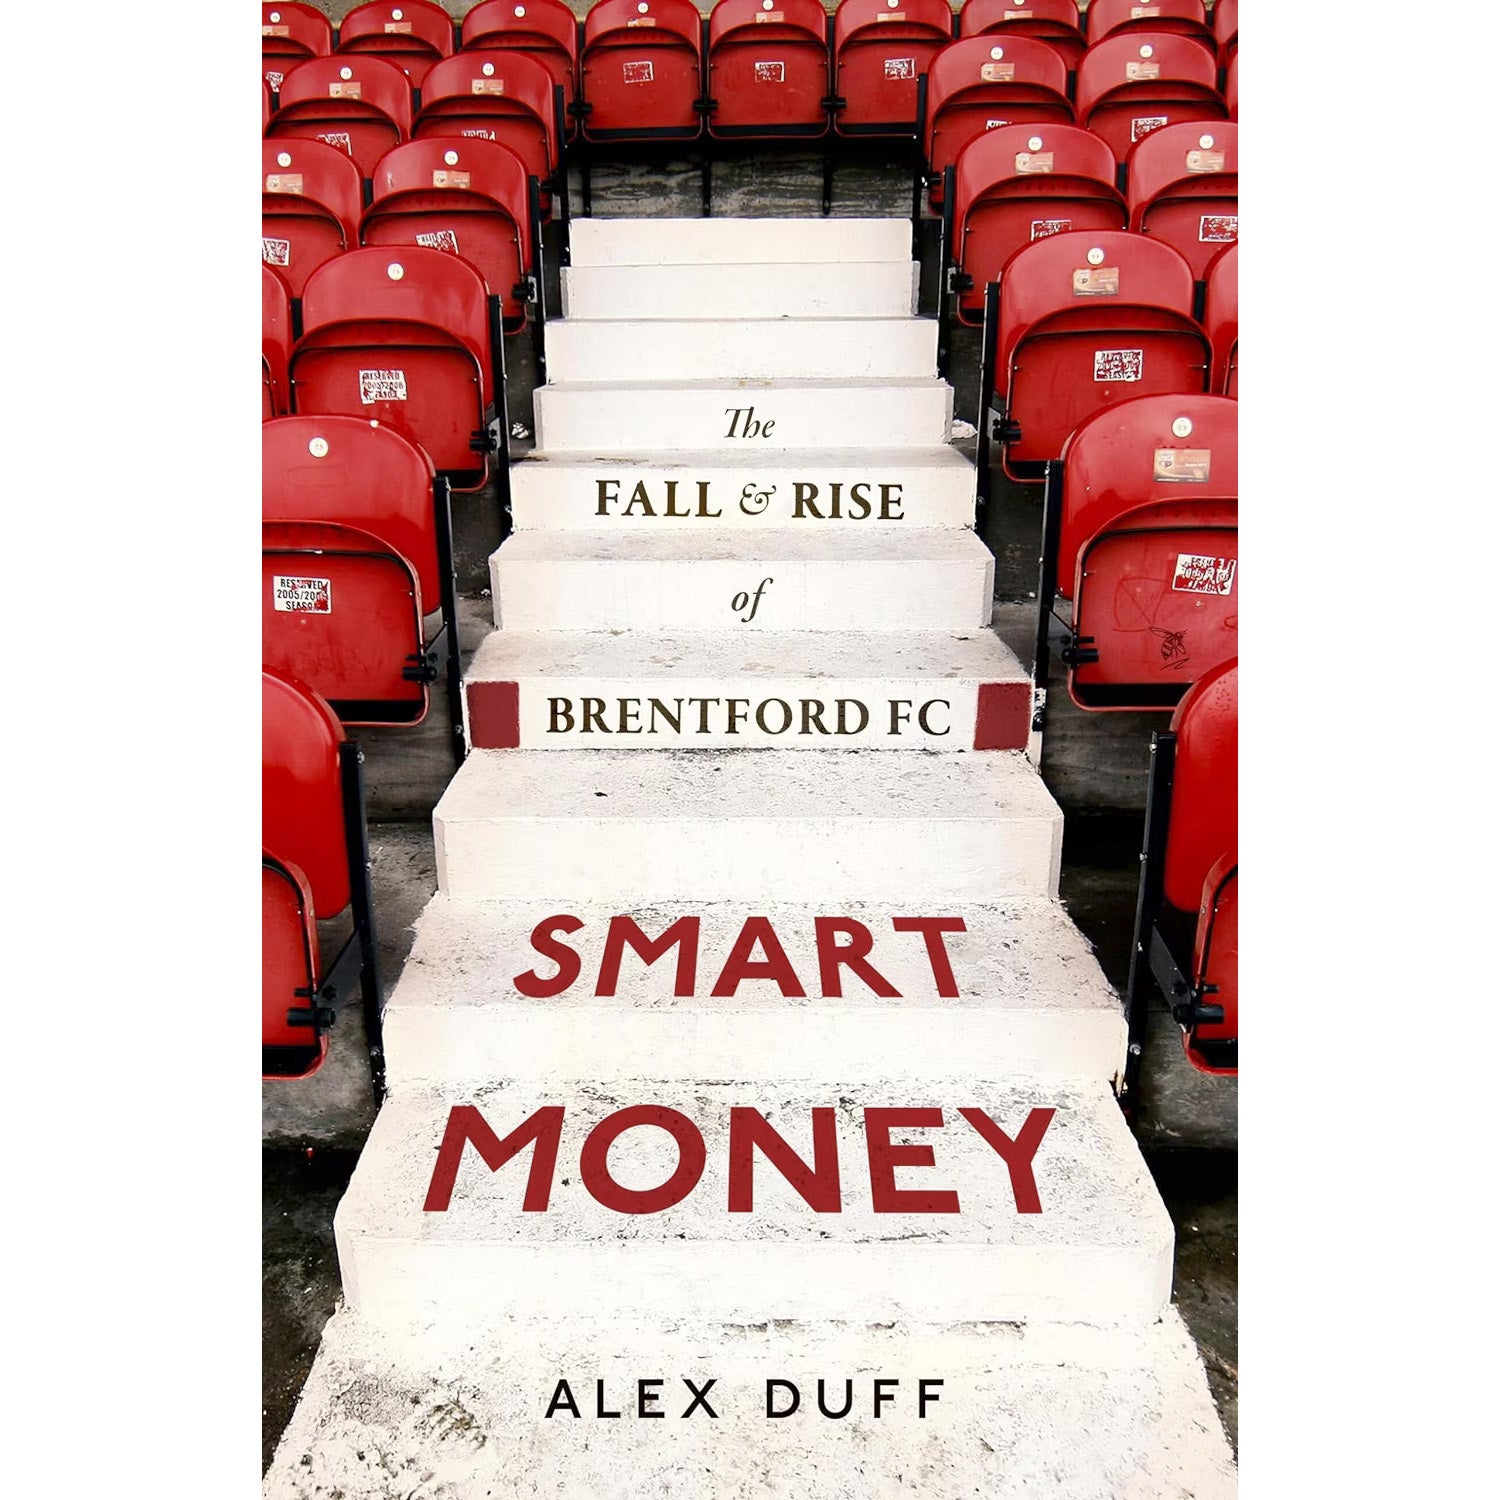 Smart Money – The Fall & Rise of Brentford FC